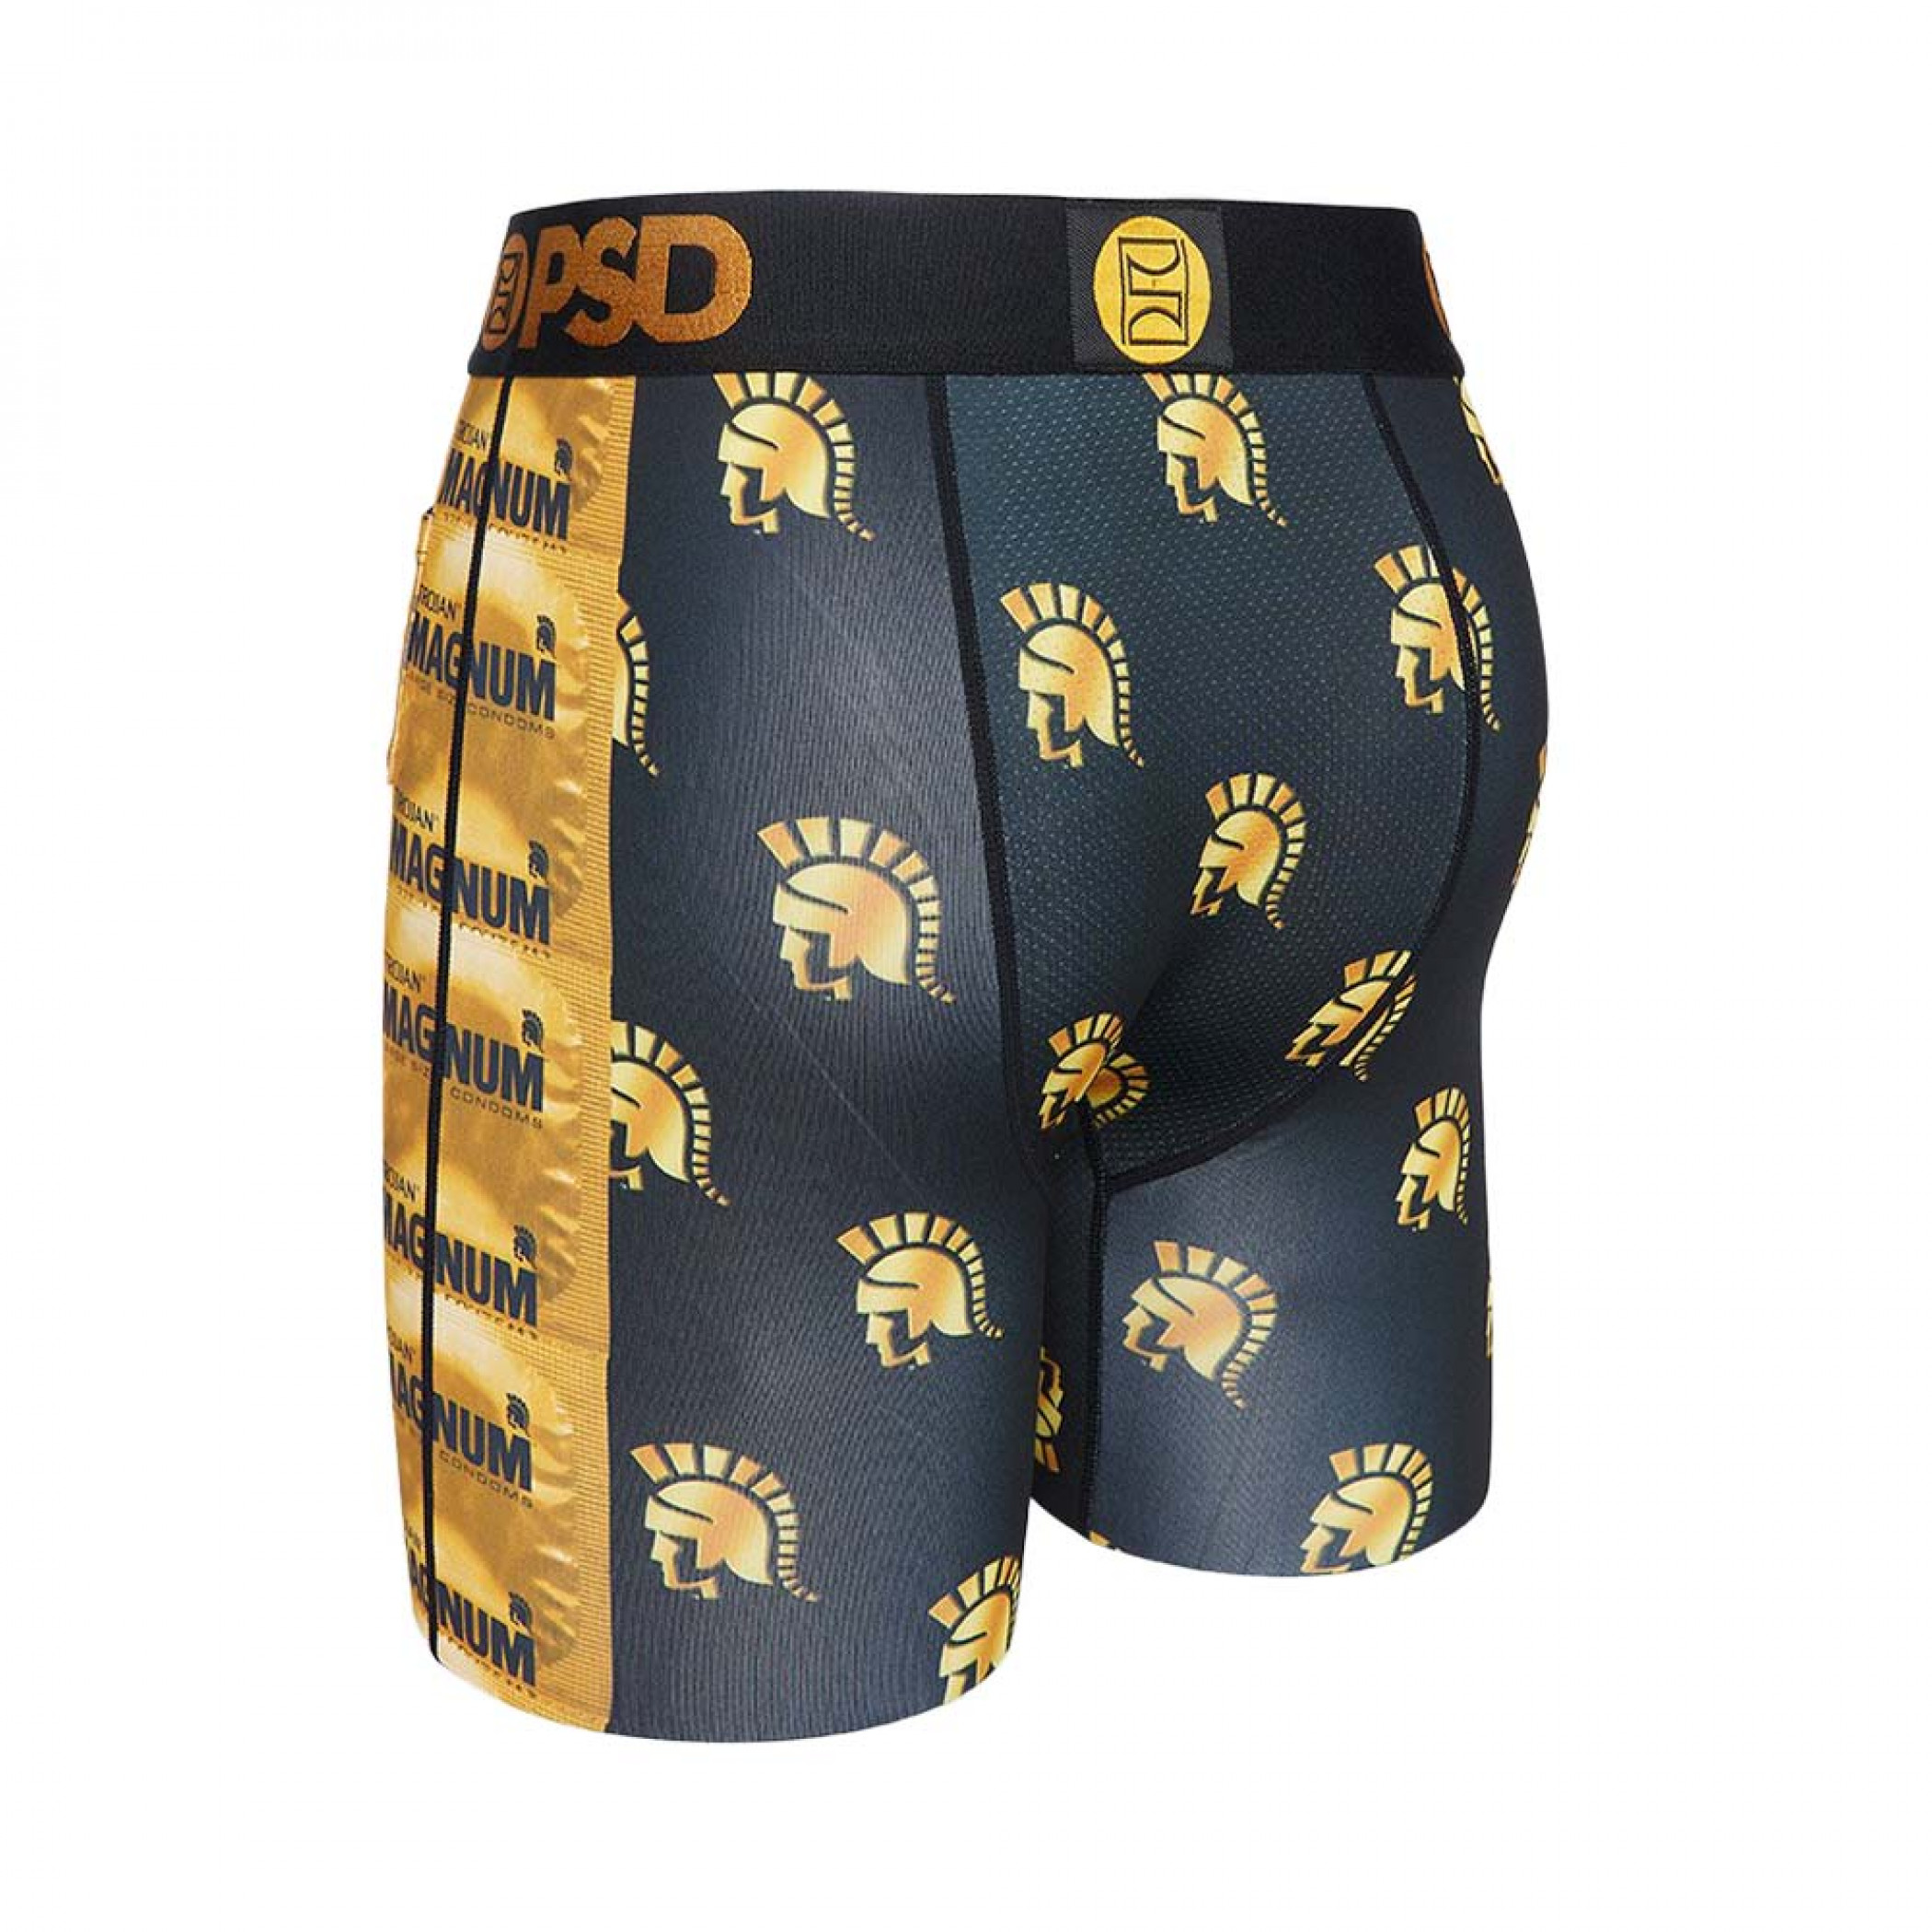 Trojan Magnum Packaging Strip and Logo Boxer Briefs with Pocket